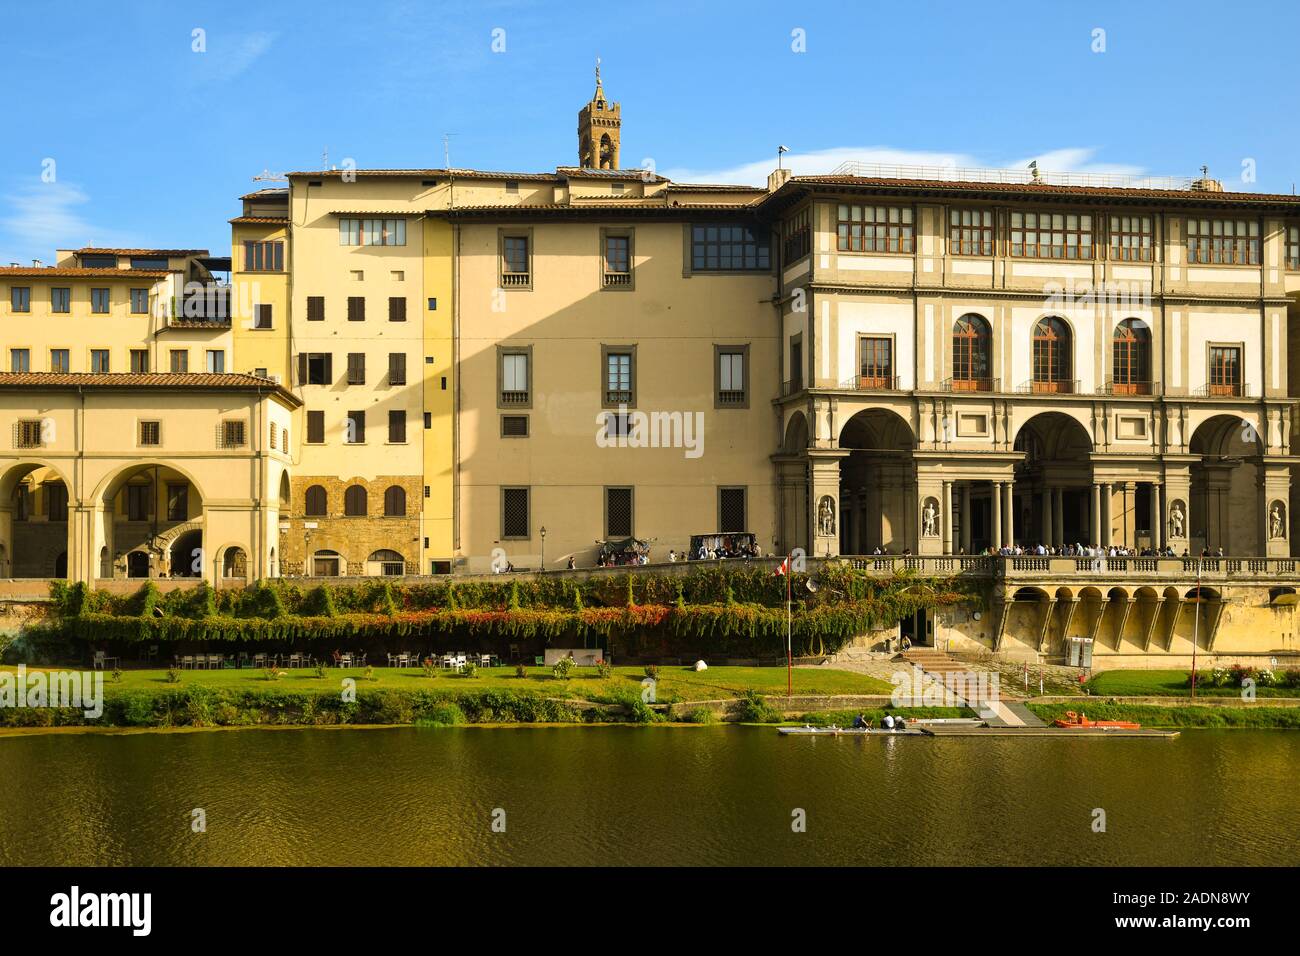 View of Arno River waterfront (Lungarno) with the Vasarian Corridor and the Uffizi Gallery in the centre of Florence, Unesco W.H. Site, Tuscany, Italy Stock Photo